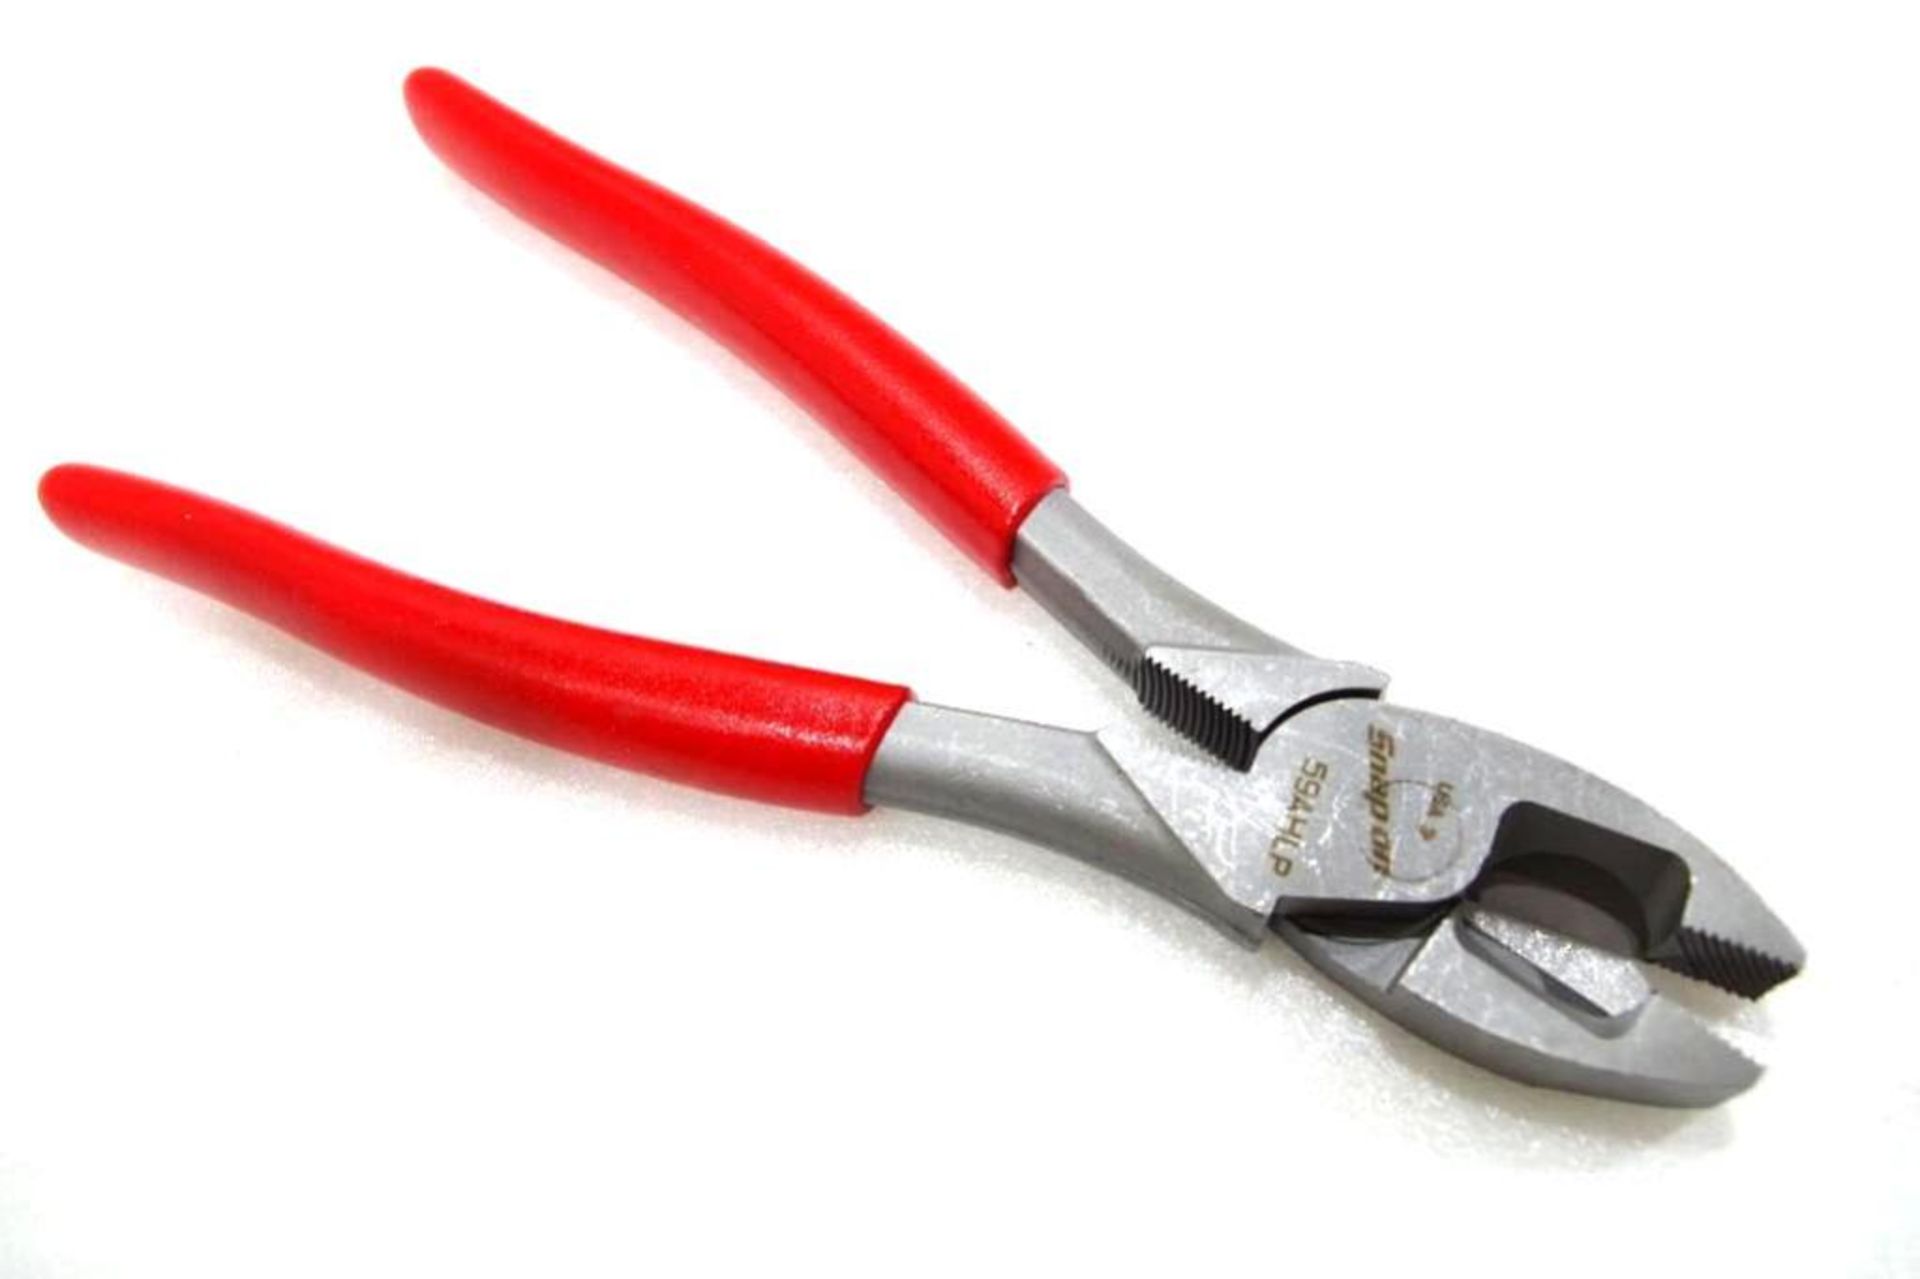 NEW SNAP-ON Lineman's Pliers, Made in USA M/N 59AHLP